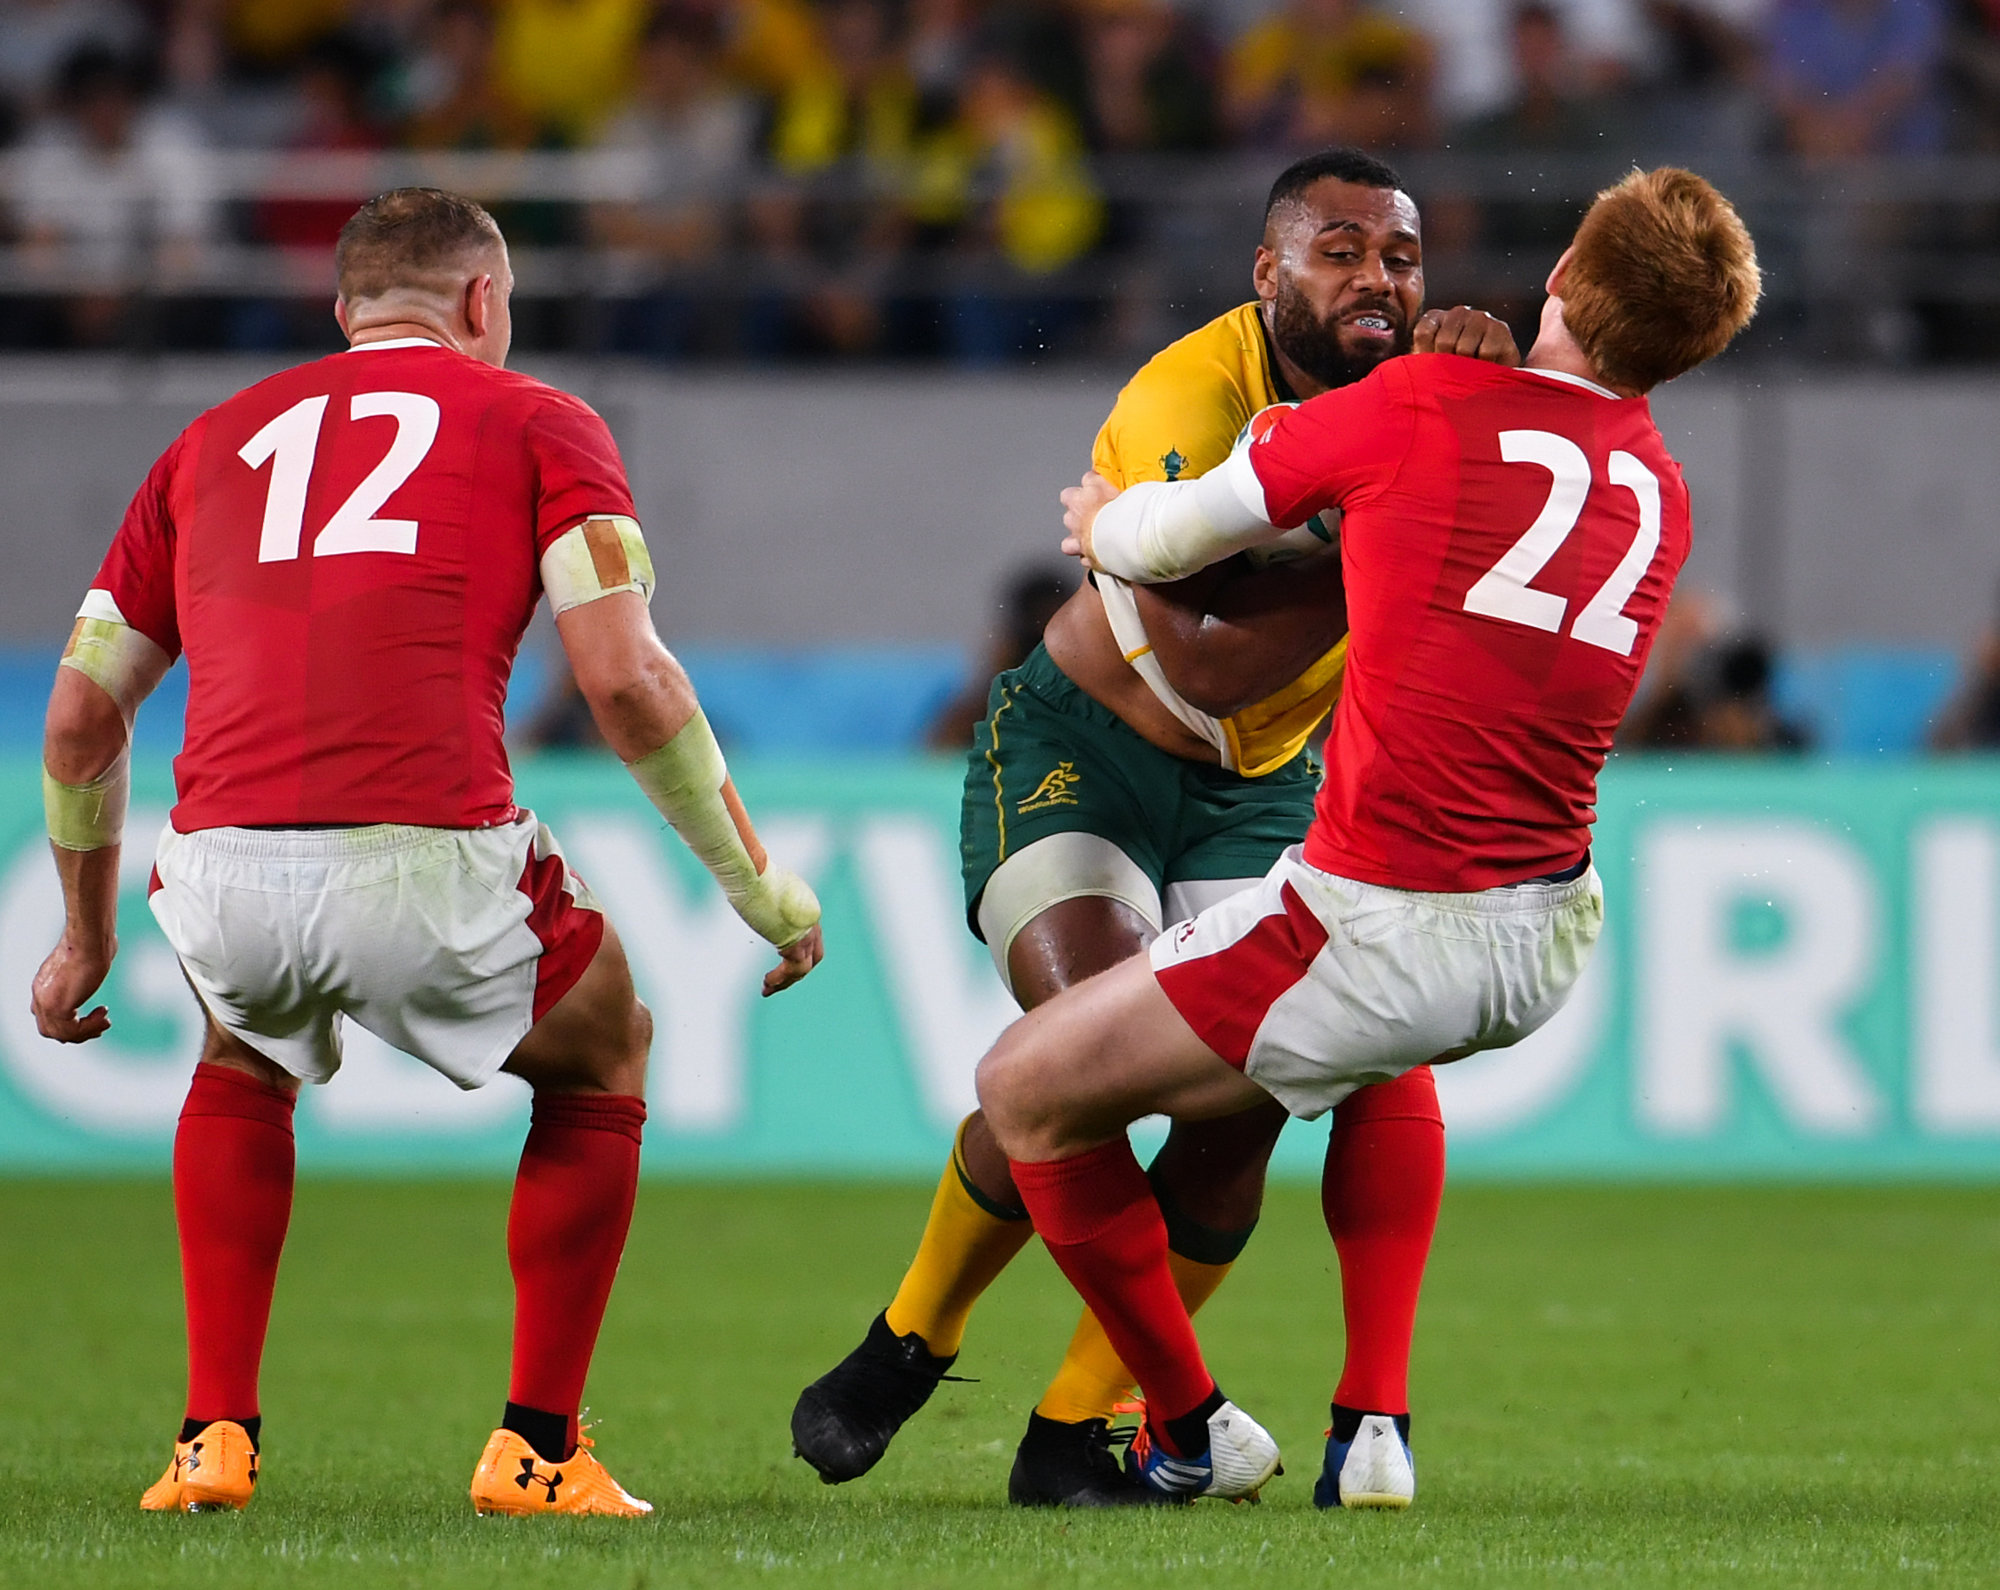 Following Controversy Over The High Tackle, Is Rugby Union Becoming